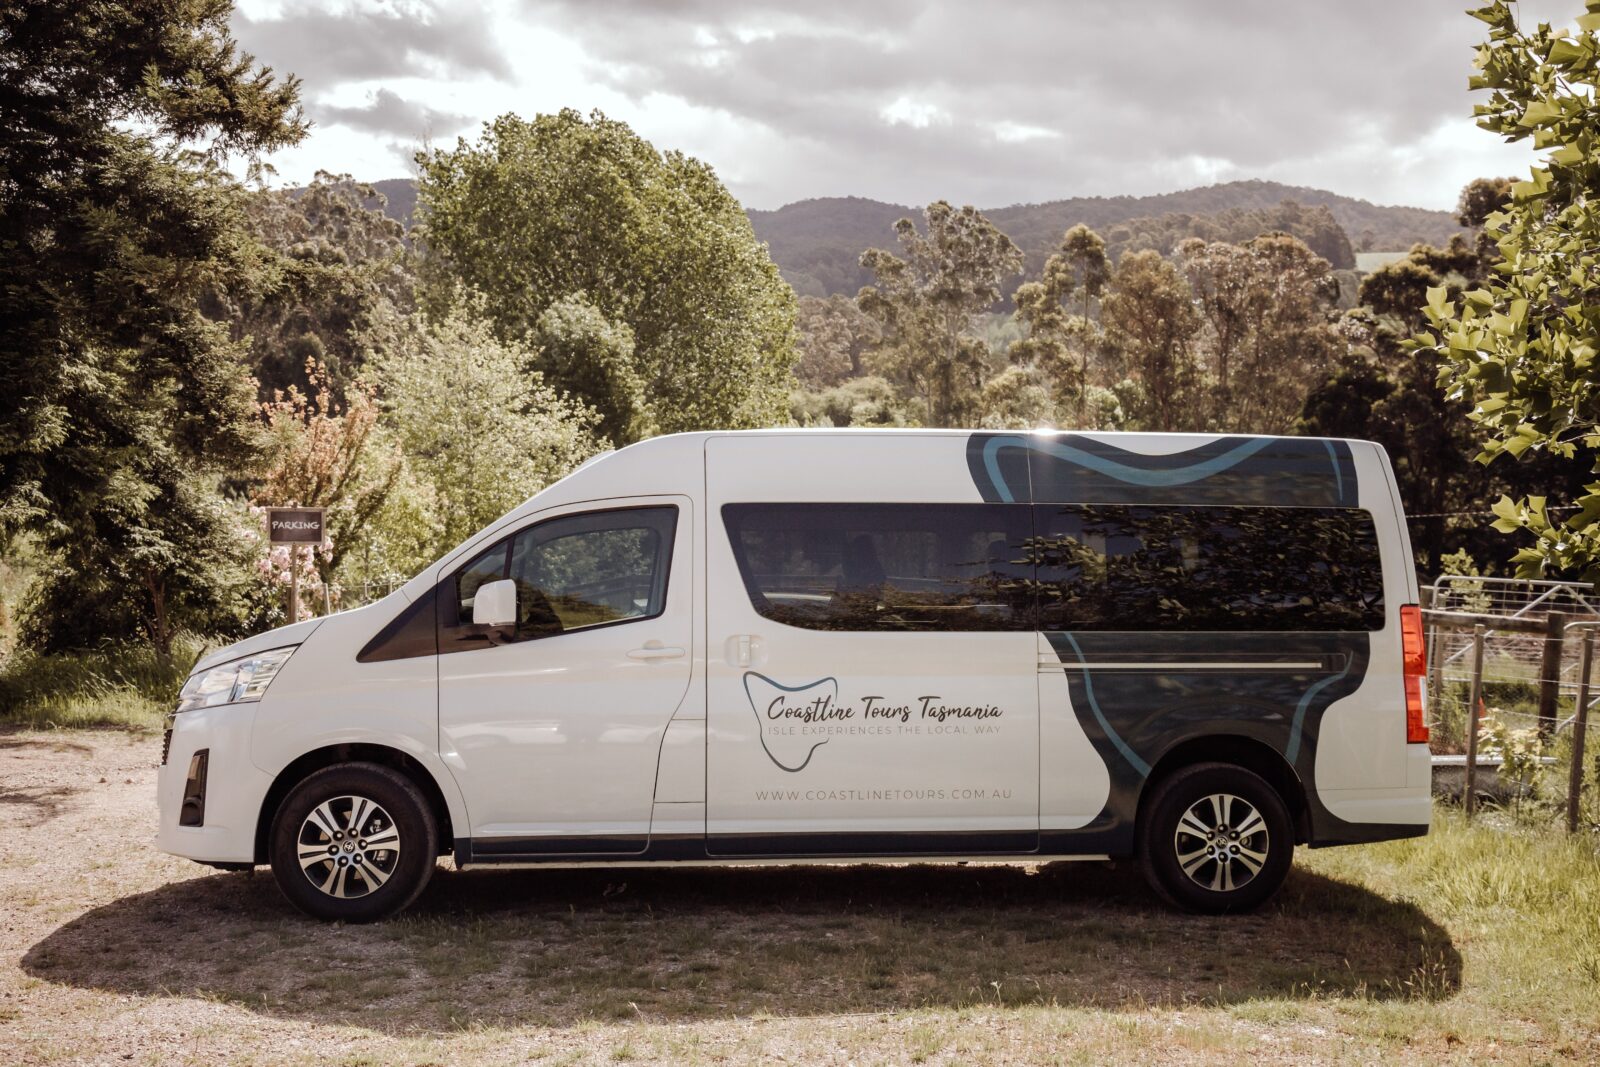 Ride along in comfort in our modern, air conditioned 11-seater van.